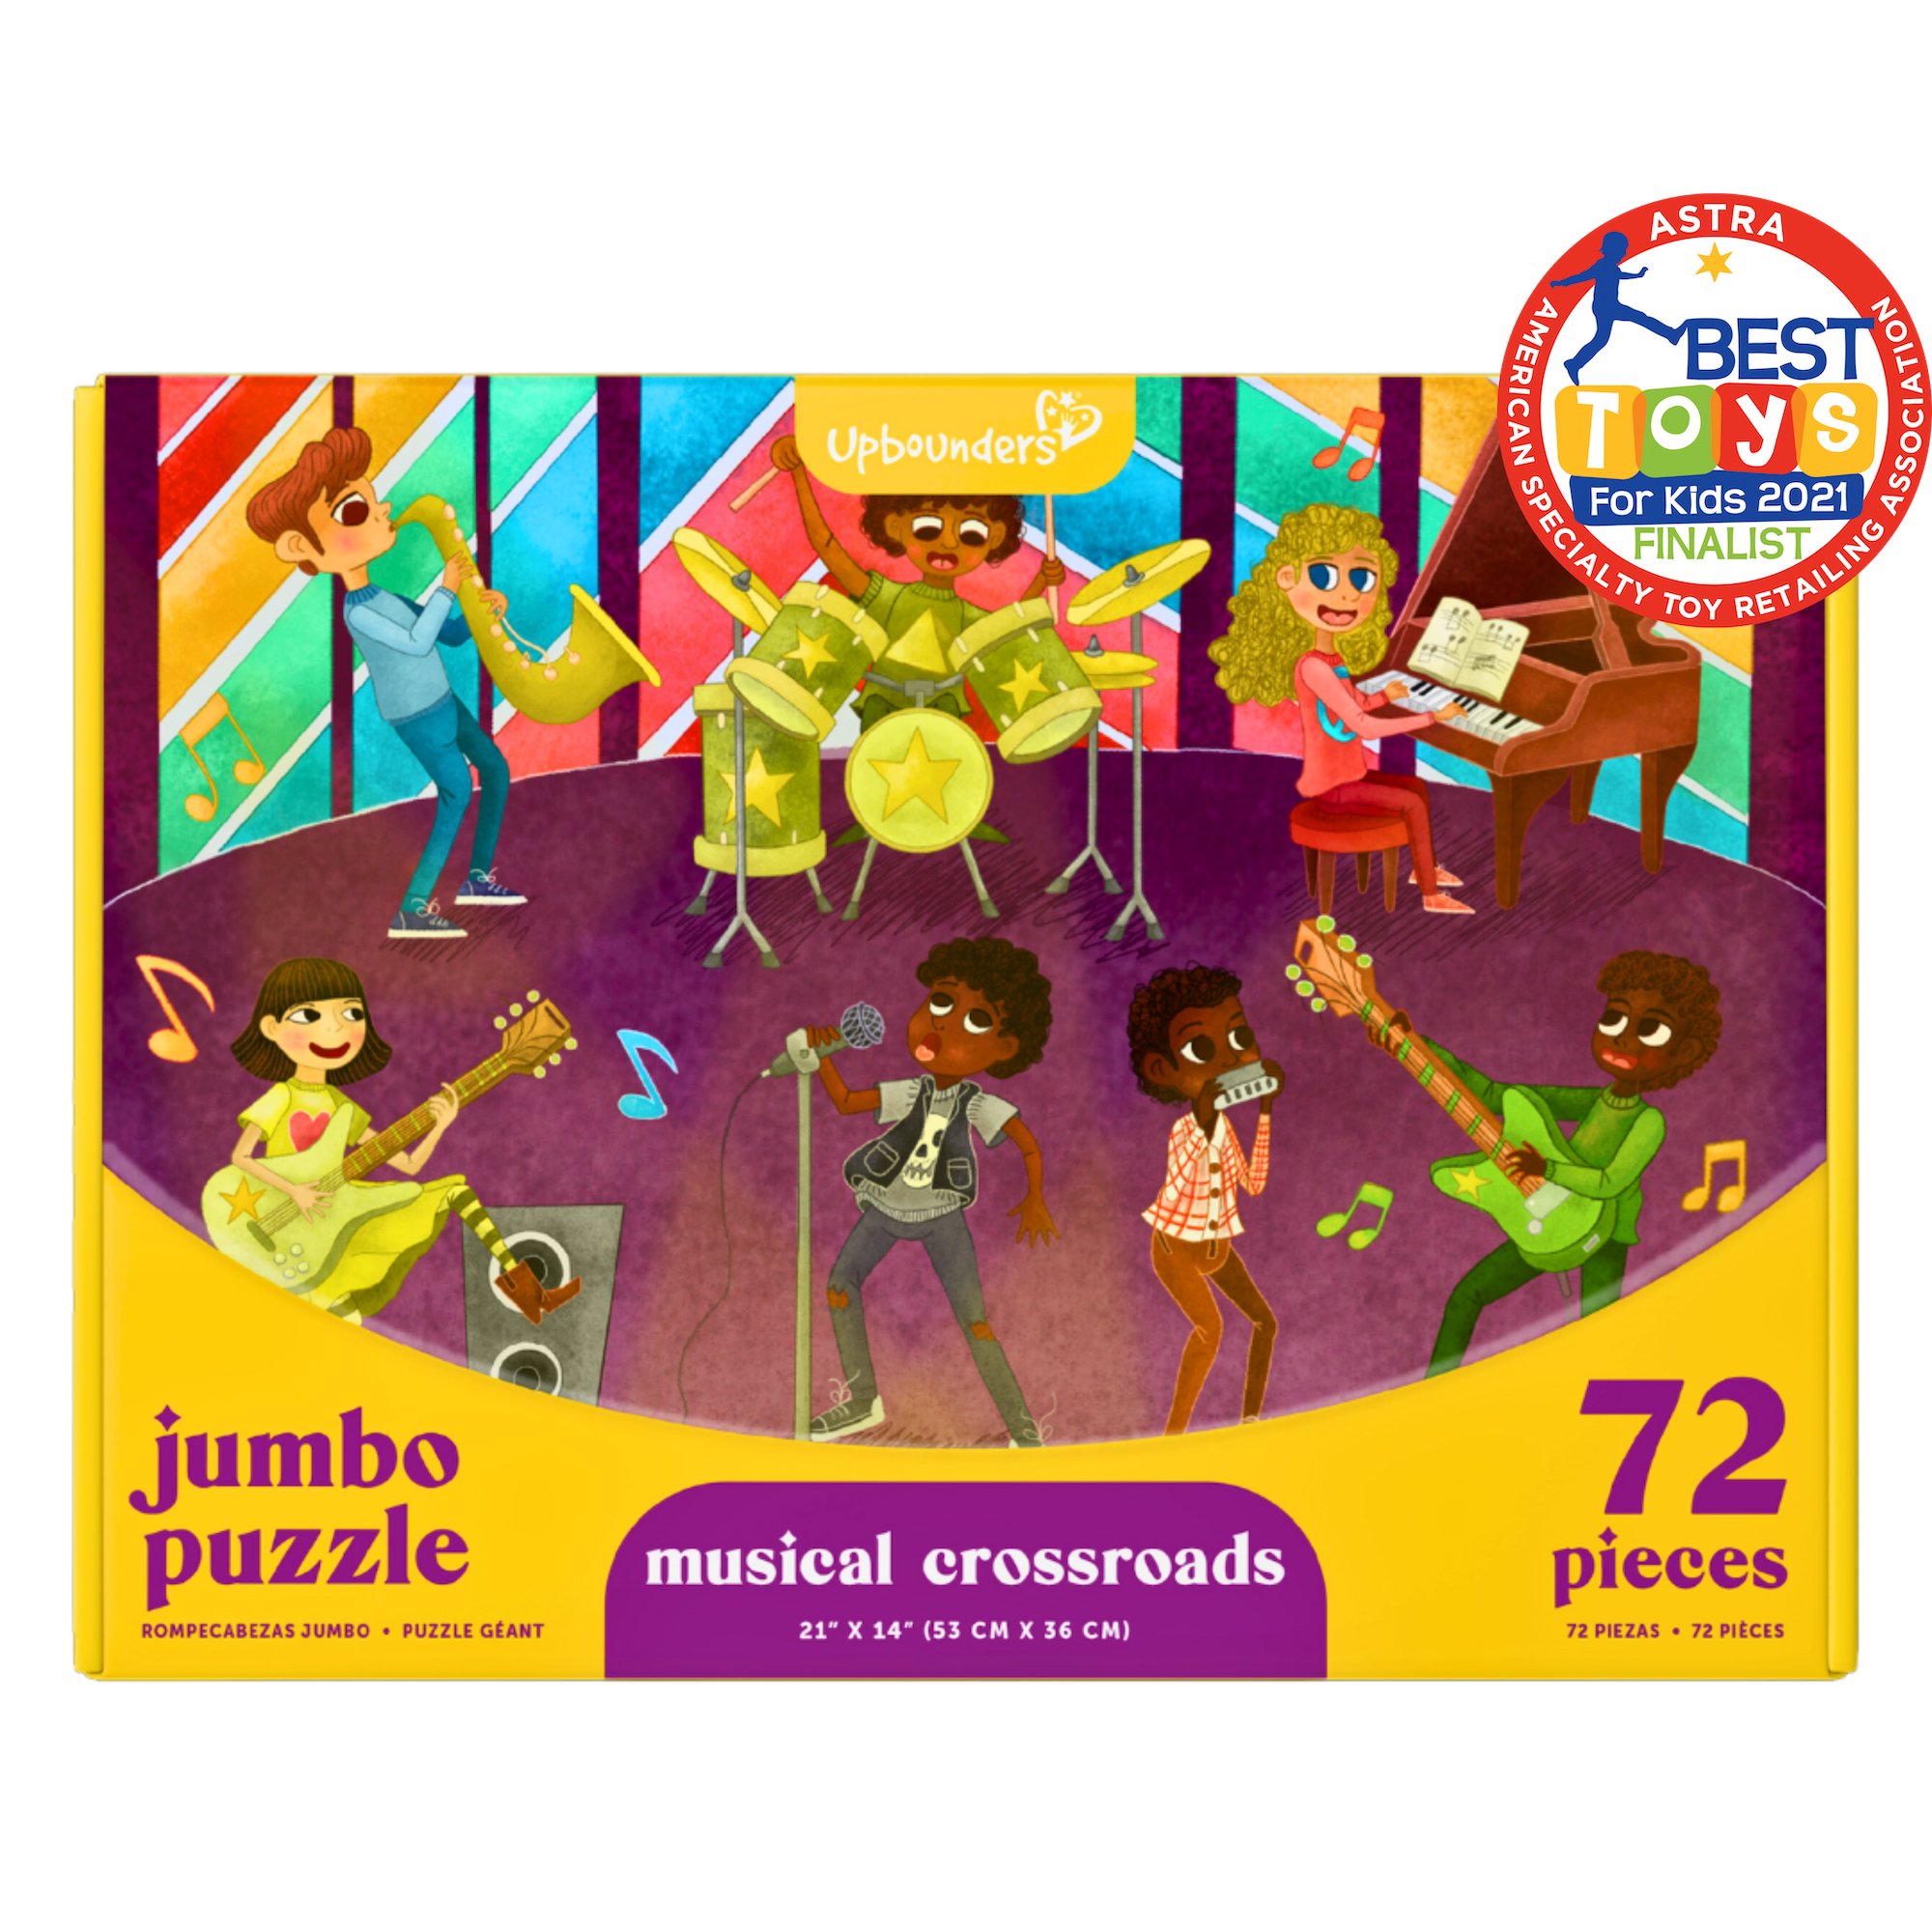 Upbounders® Musical Crossroads 72 Piece Puzzle / $19.99